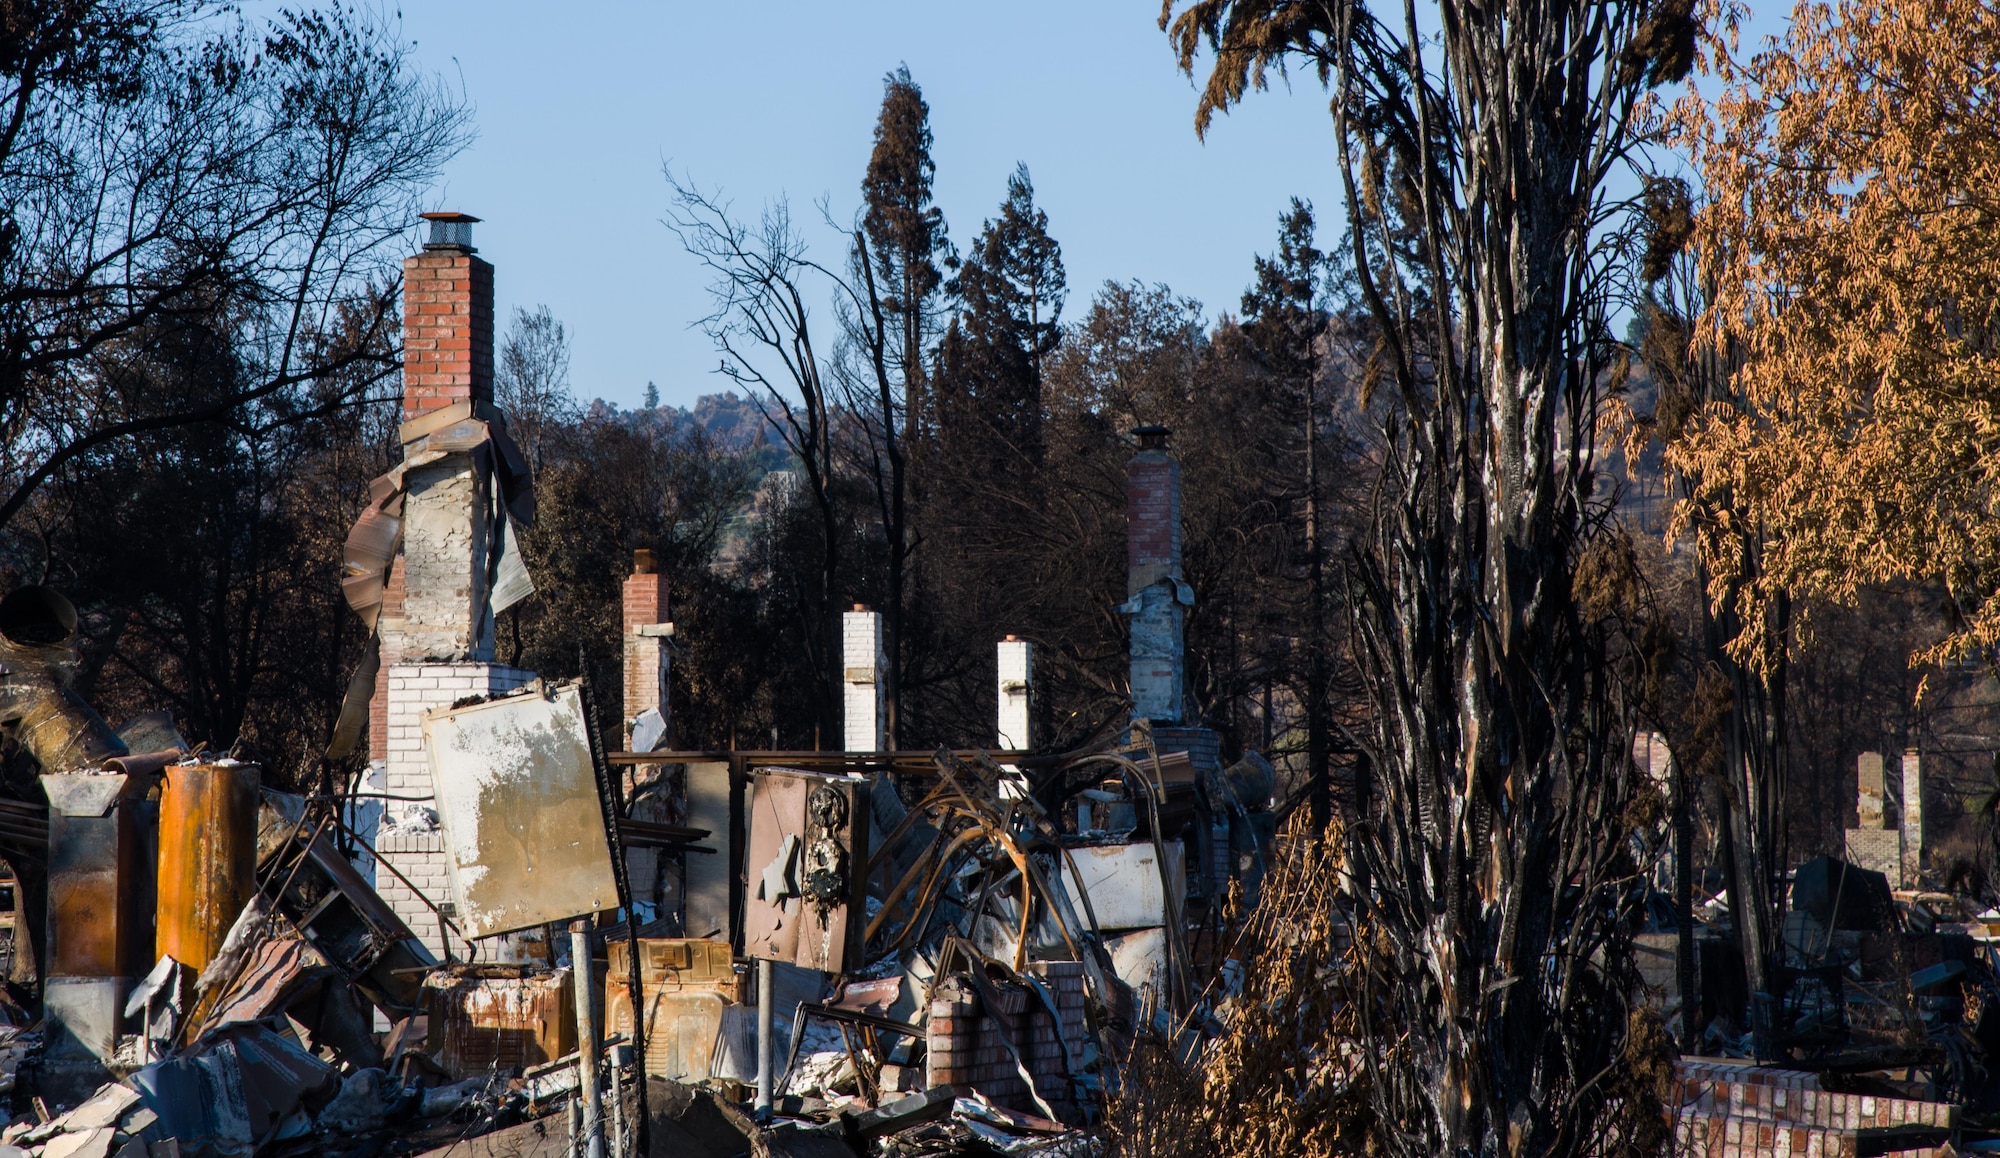 Chimneys stand as remnants of a neighborhood that was decimated by the California wildfire in Santa Rosa, Calif., on Oct. 31, 2017. The recent fires destroyed more than 15,000 homes and caused more than $3 billion in damages.